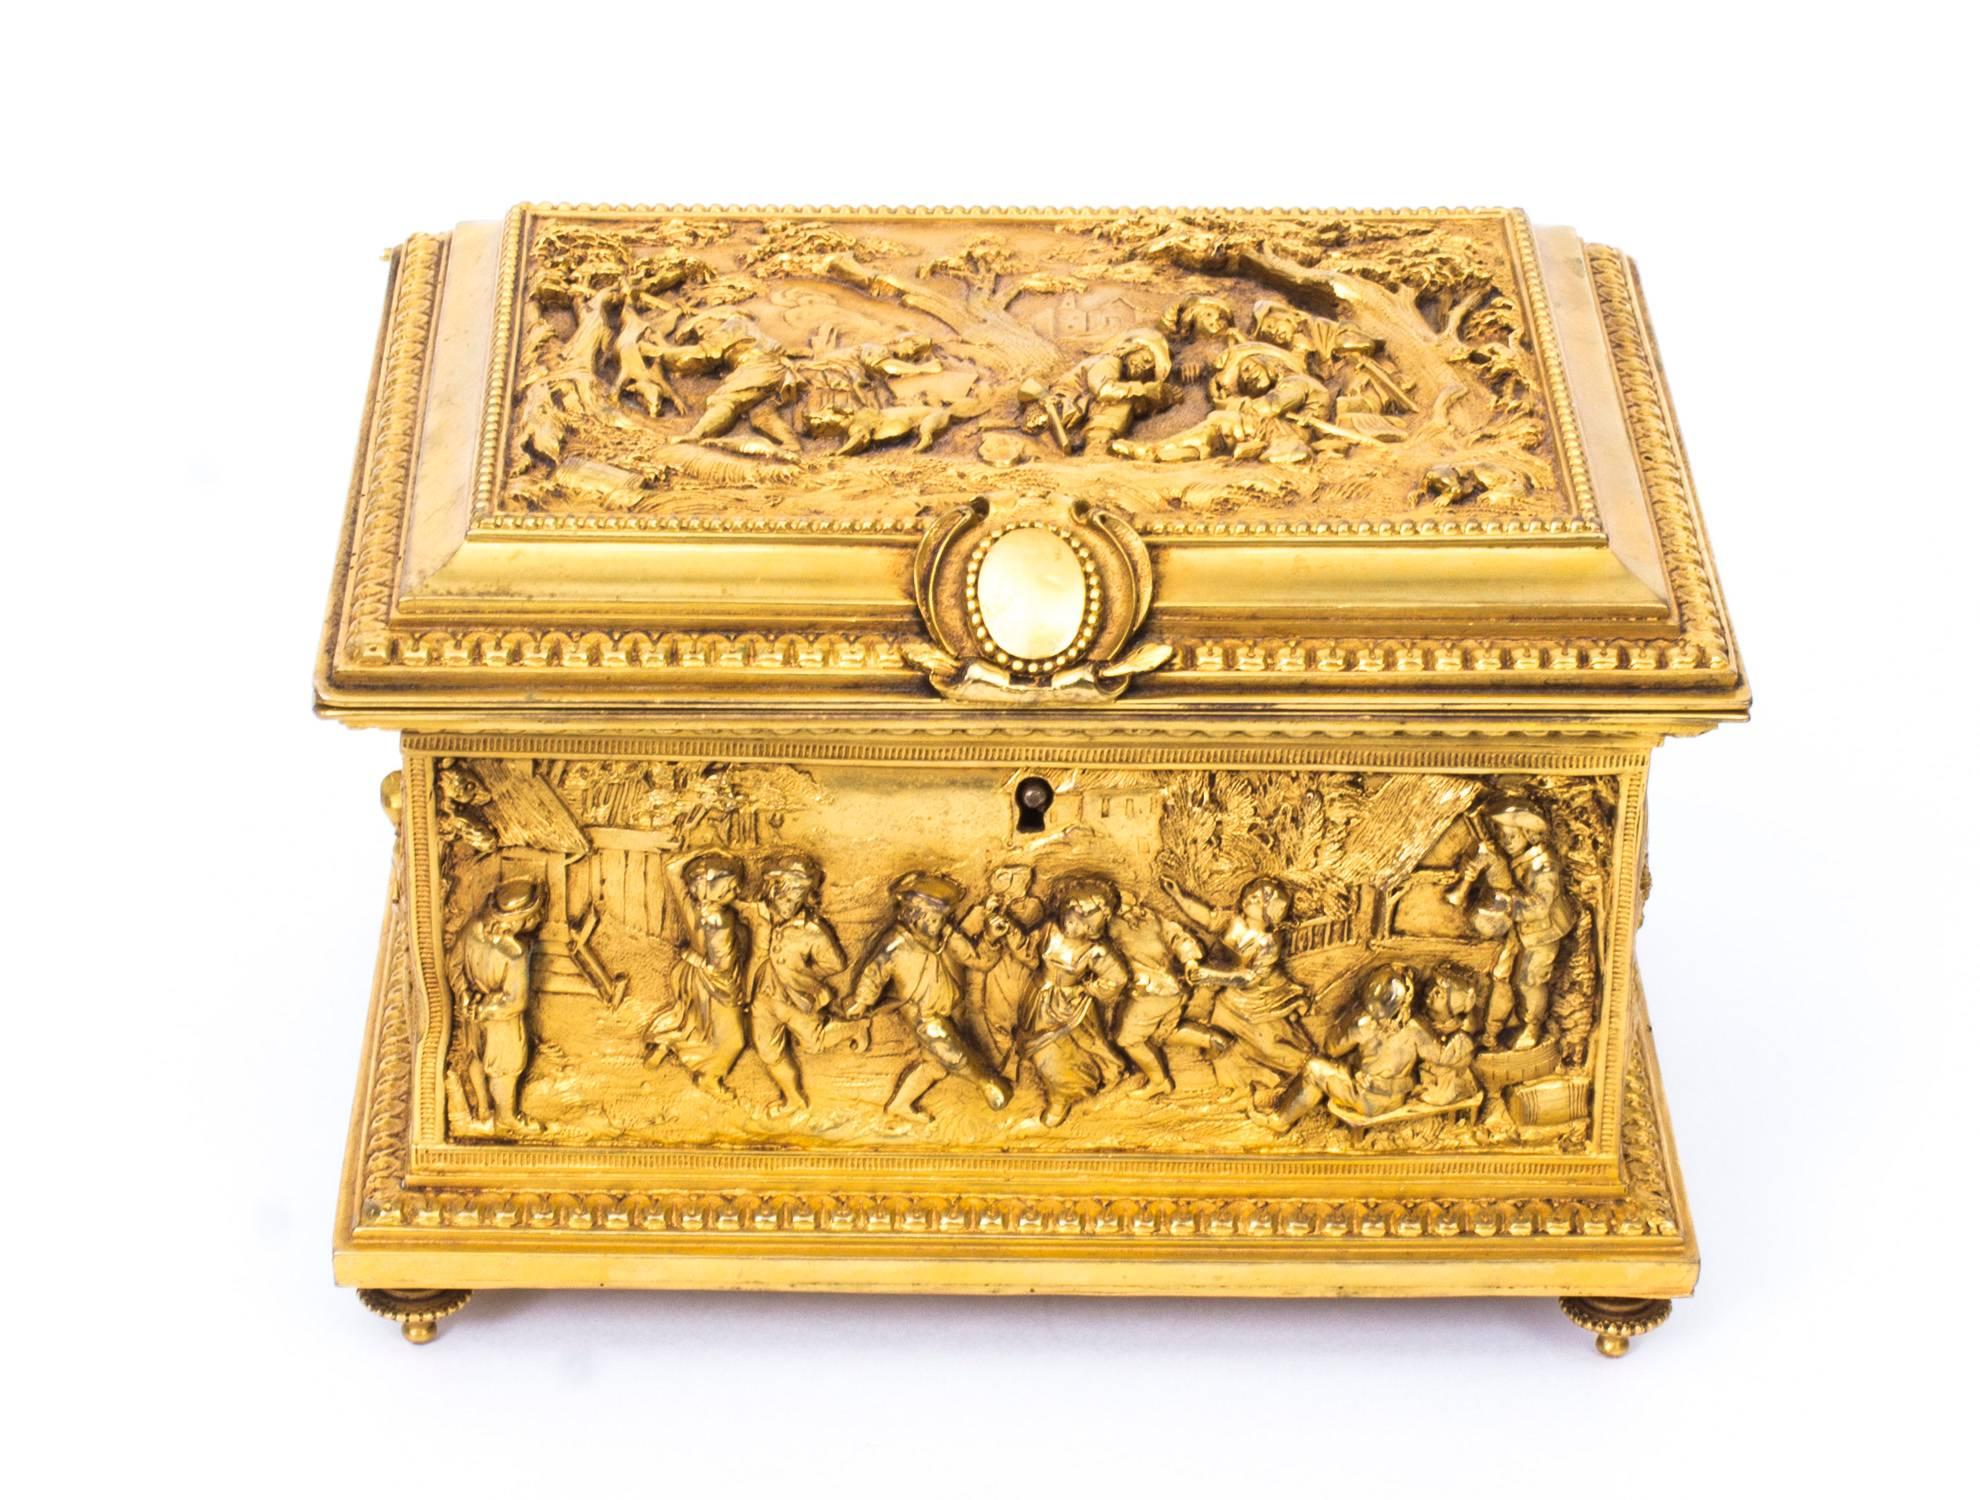 This is a beautiful antique French gilded ormolu jewellery casket, circa 1870 in date.

The top, front, sides and back are beautifully cast in gilt bronze and feature panels of medieval scenes of revellers hunting and feasting. 

The interior is